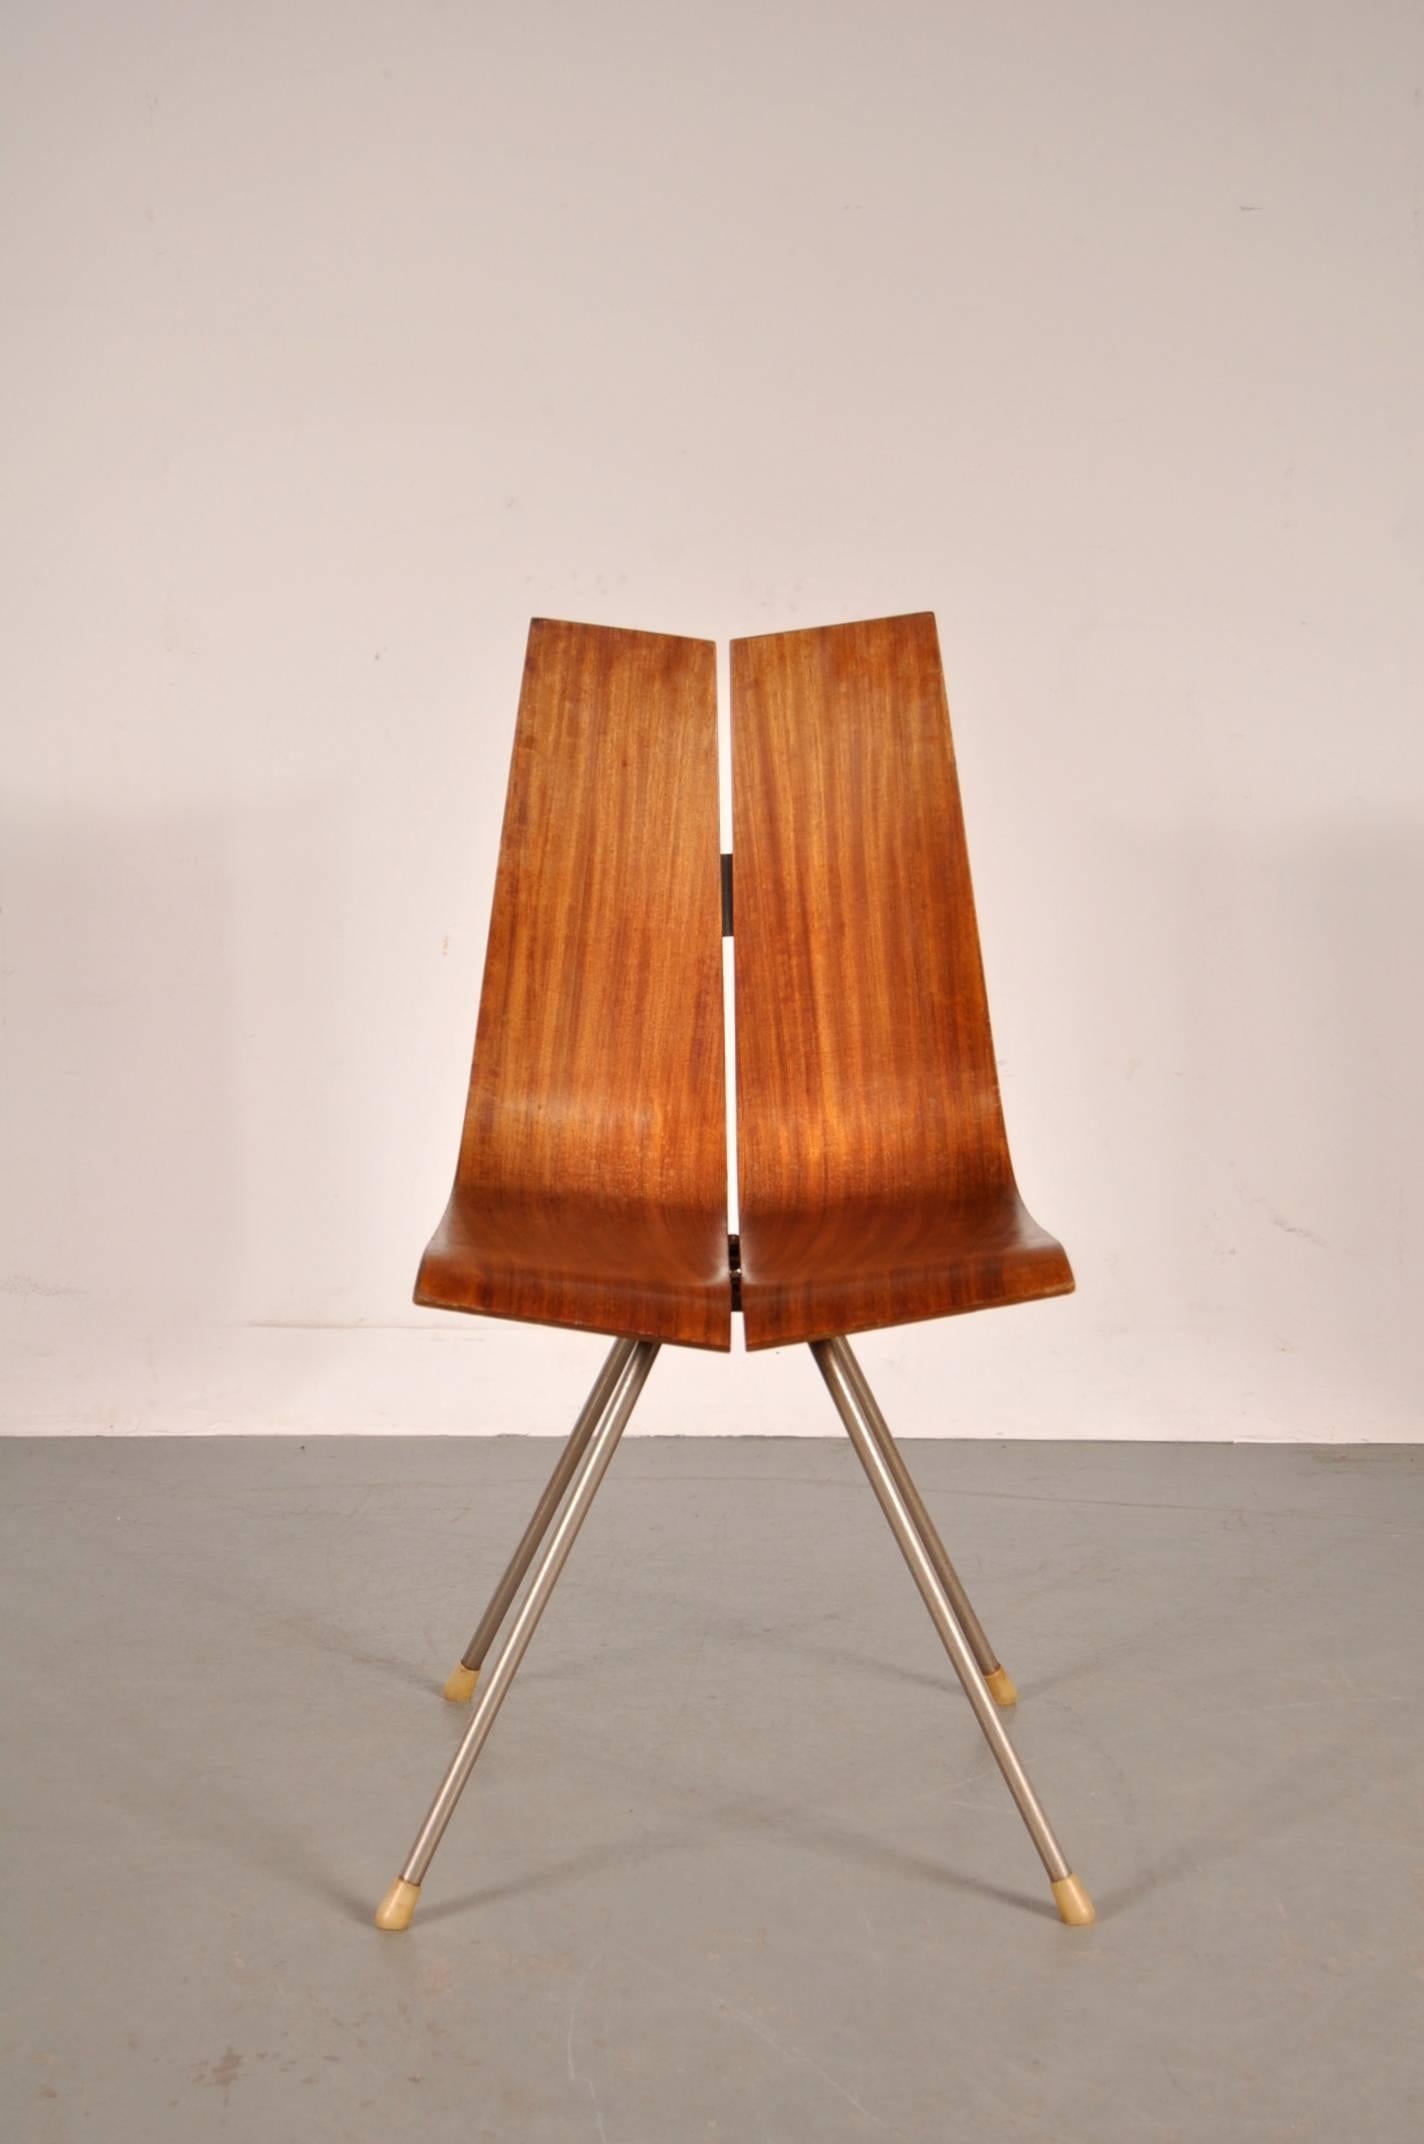 Swiss Dining Side Chair by Hans Bellman for Horgen-Glarus, circa 1950